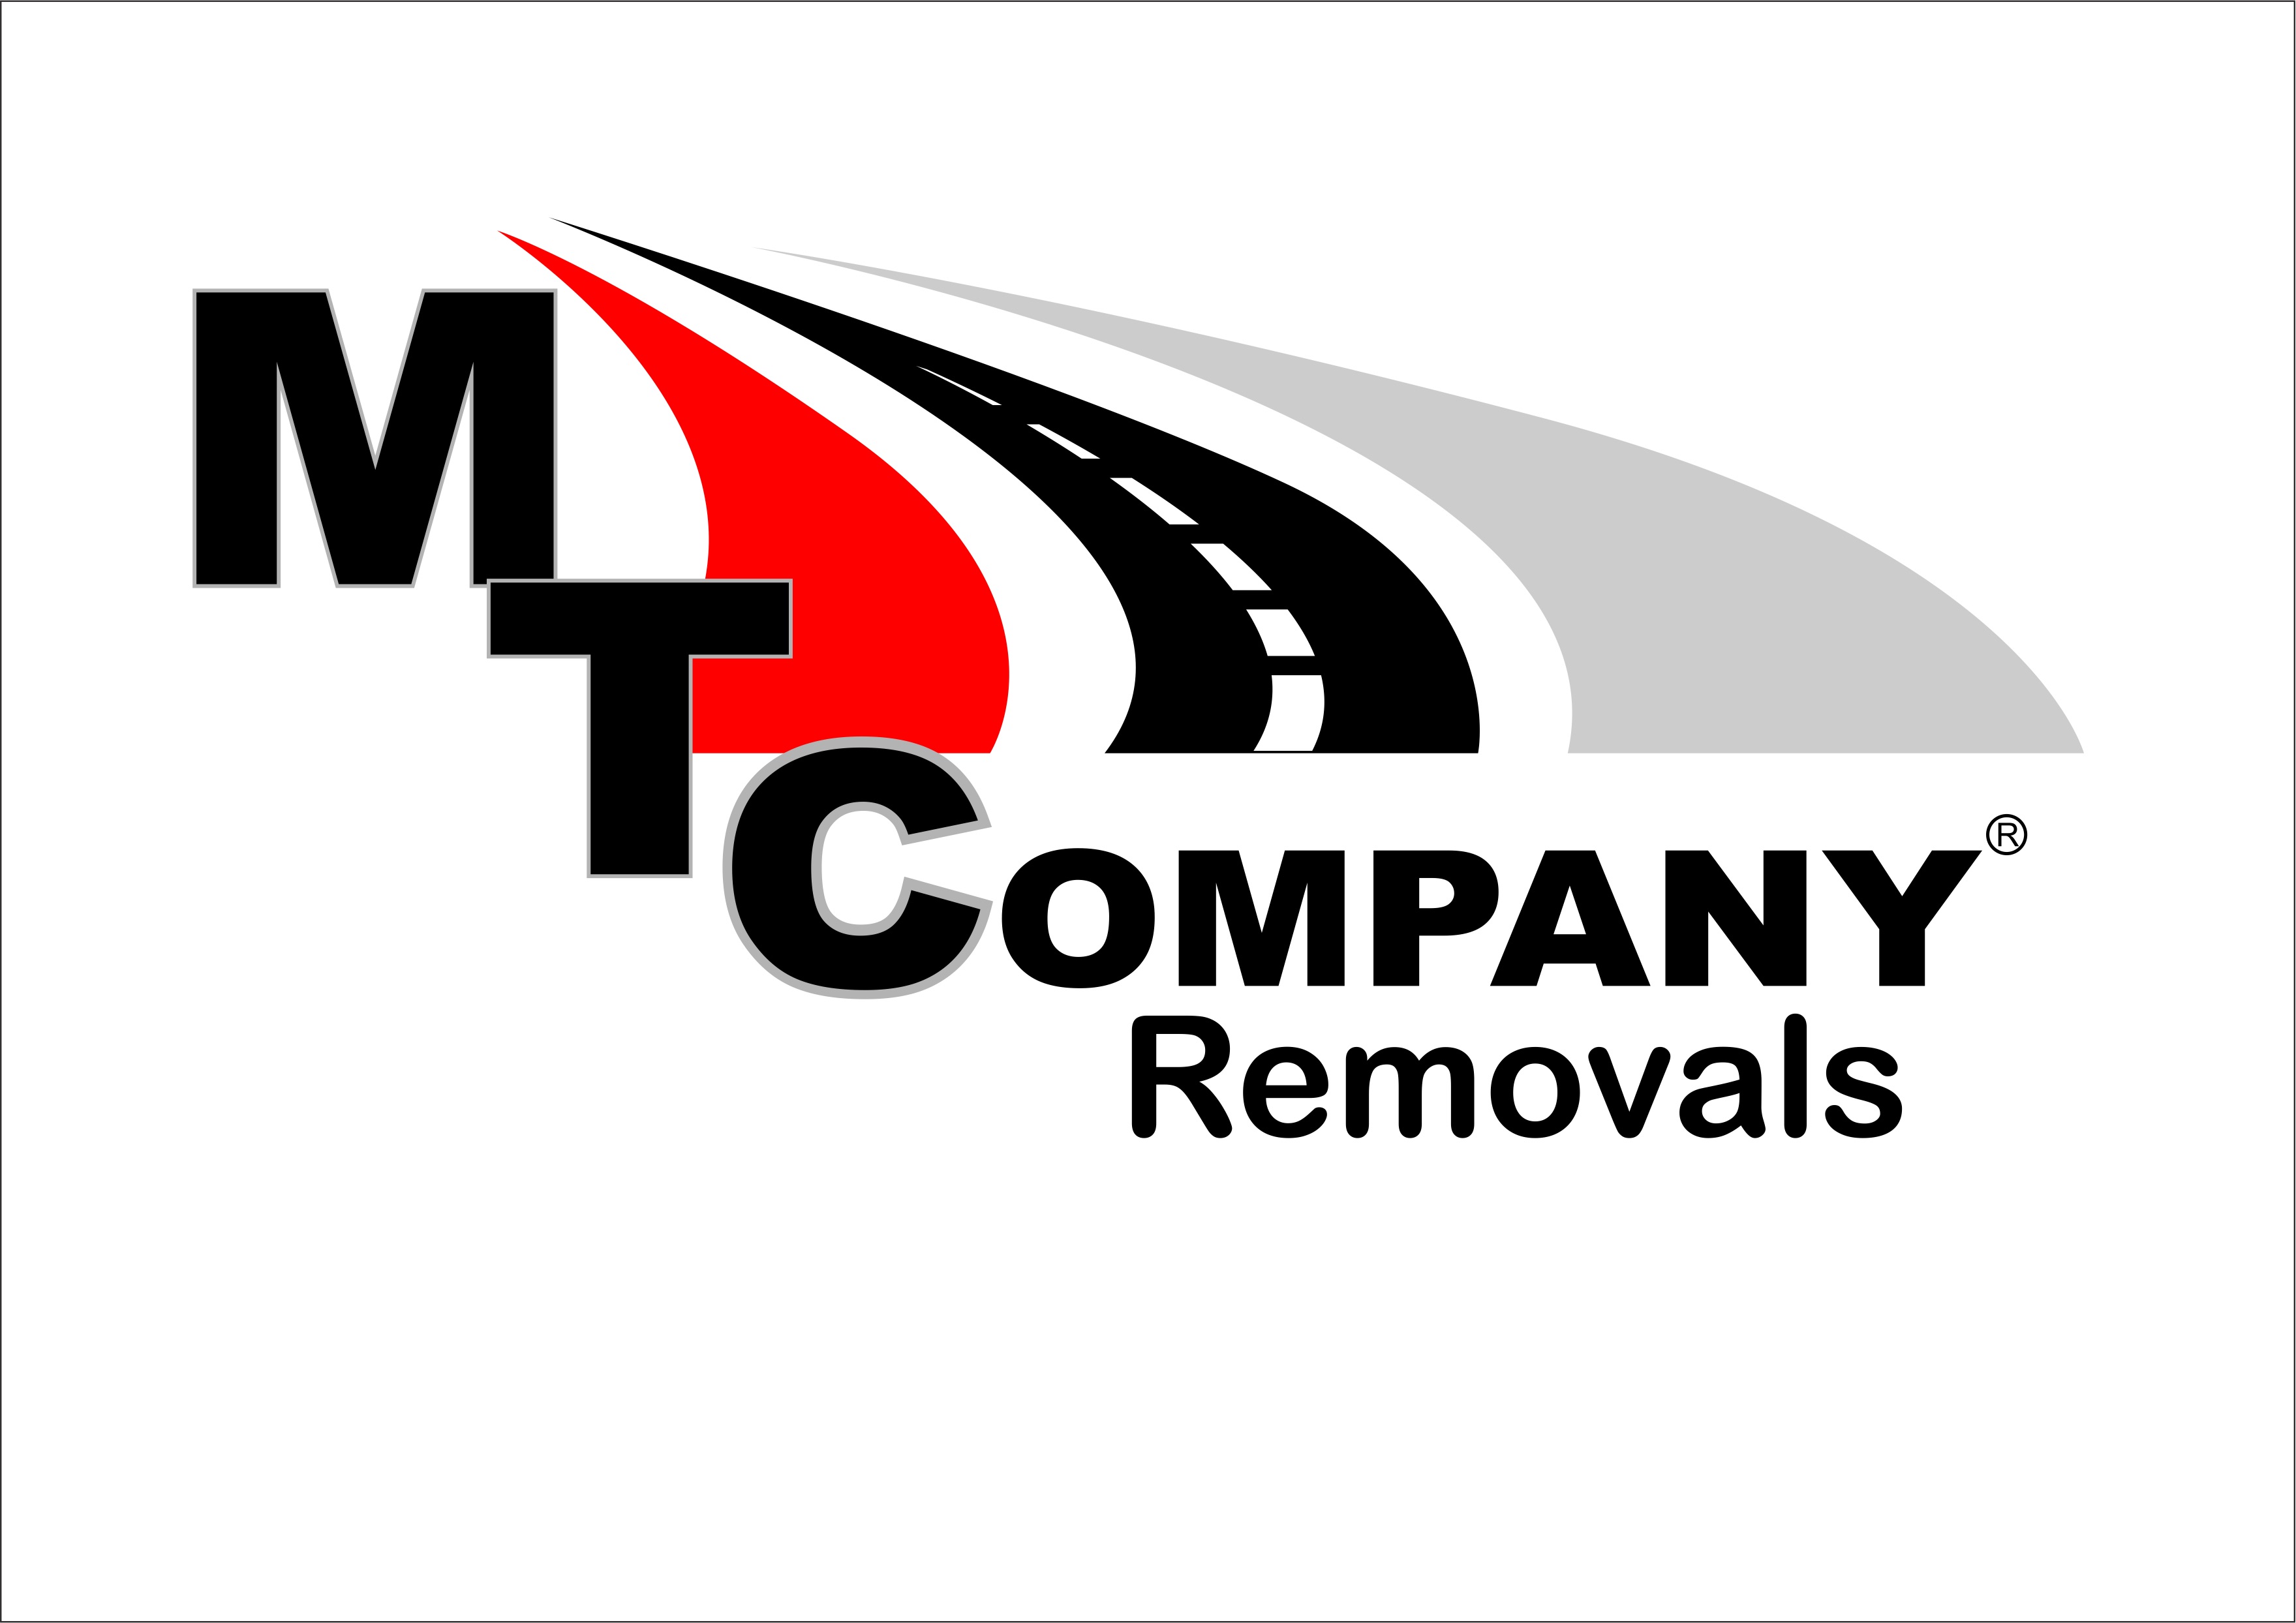 Logo of MTC Removals Company LTD Removals - Industrial And Business In London, Greater London